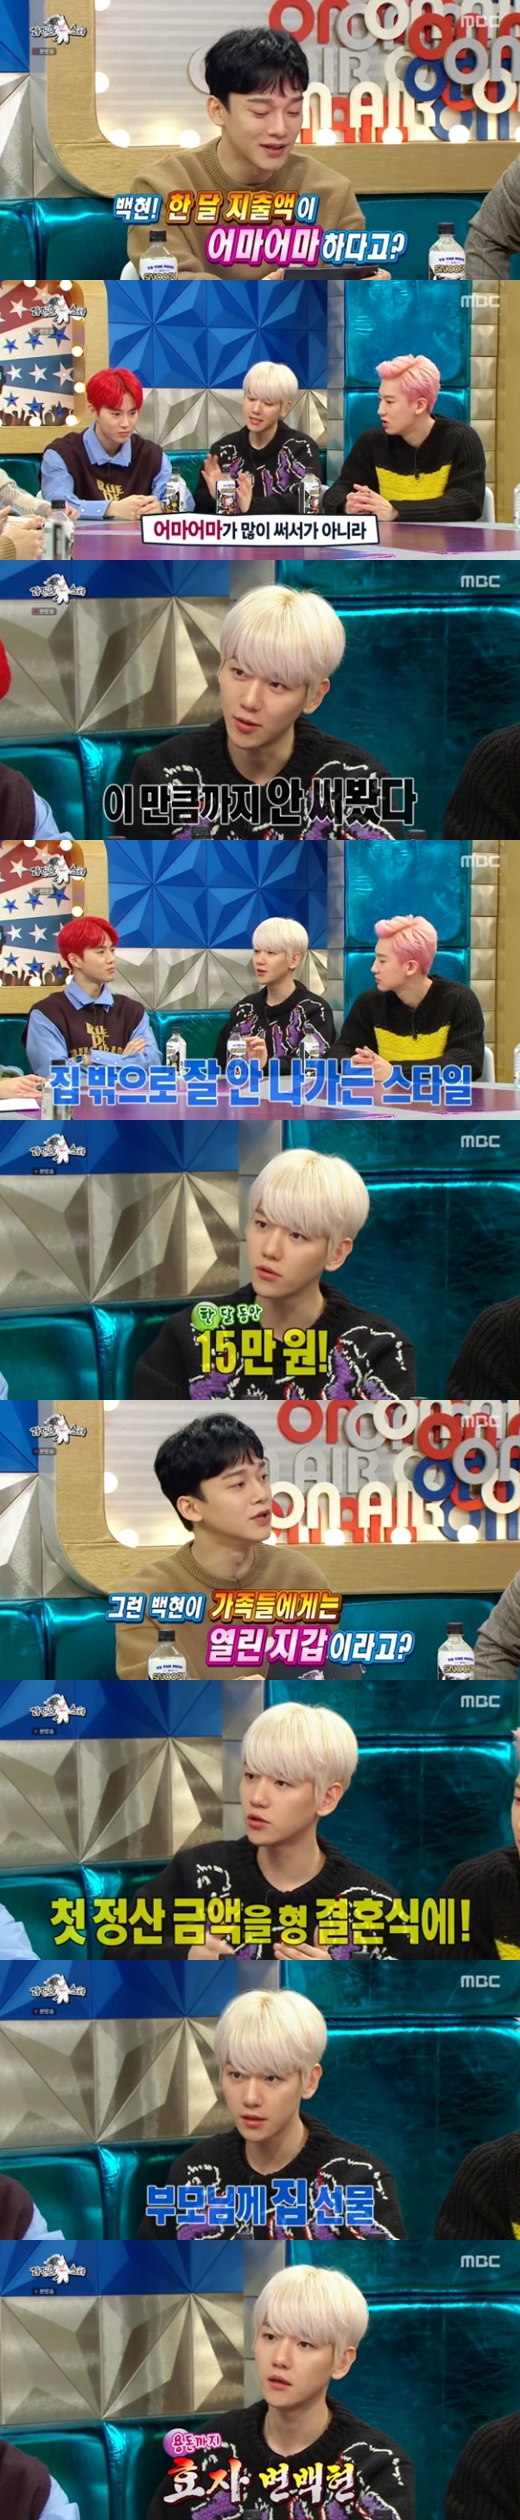 Group EXO Baekhyun boasted a flattering aspect.MBC Radio Star, which was broadcasted on the 4th night, was featured in EXO Radio Star feature, and EXO members Suho, Baekhyun, Chan Yeol, Kai, Sehoon and Chen appeared.Asked, Am I spending a month? Baekhyun surprised me by saying, I do not go out, I do not enjoy shopping, and I do not spend the most about 150,000 won.Baekhyun, who is an open wallet for his family, said, After the first setlement, my brother got married. I did not have much money to collect, so I spent my first setlement amount on the wedding.I was so narrow that I lived with my parents when I was a child, so I made it a new building. I gave a lot of allowance. 